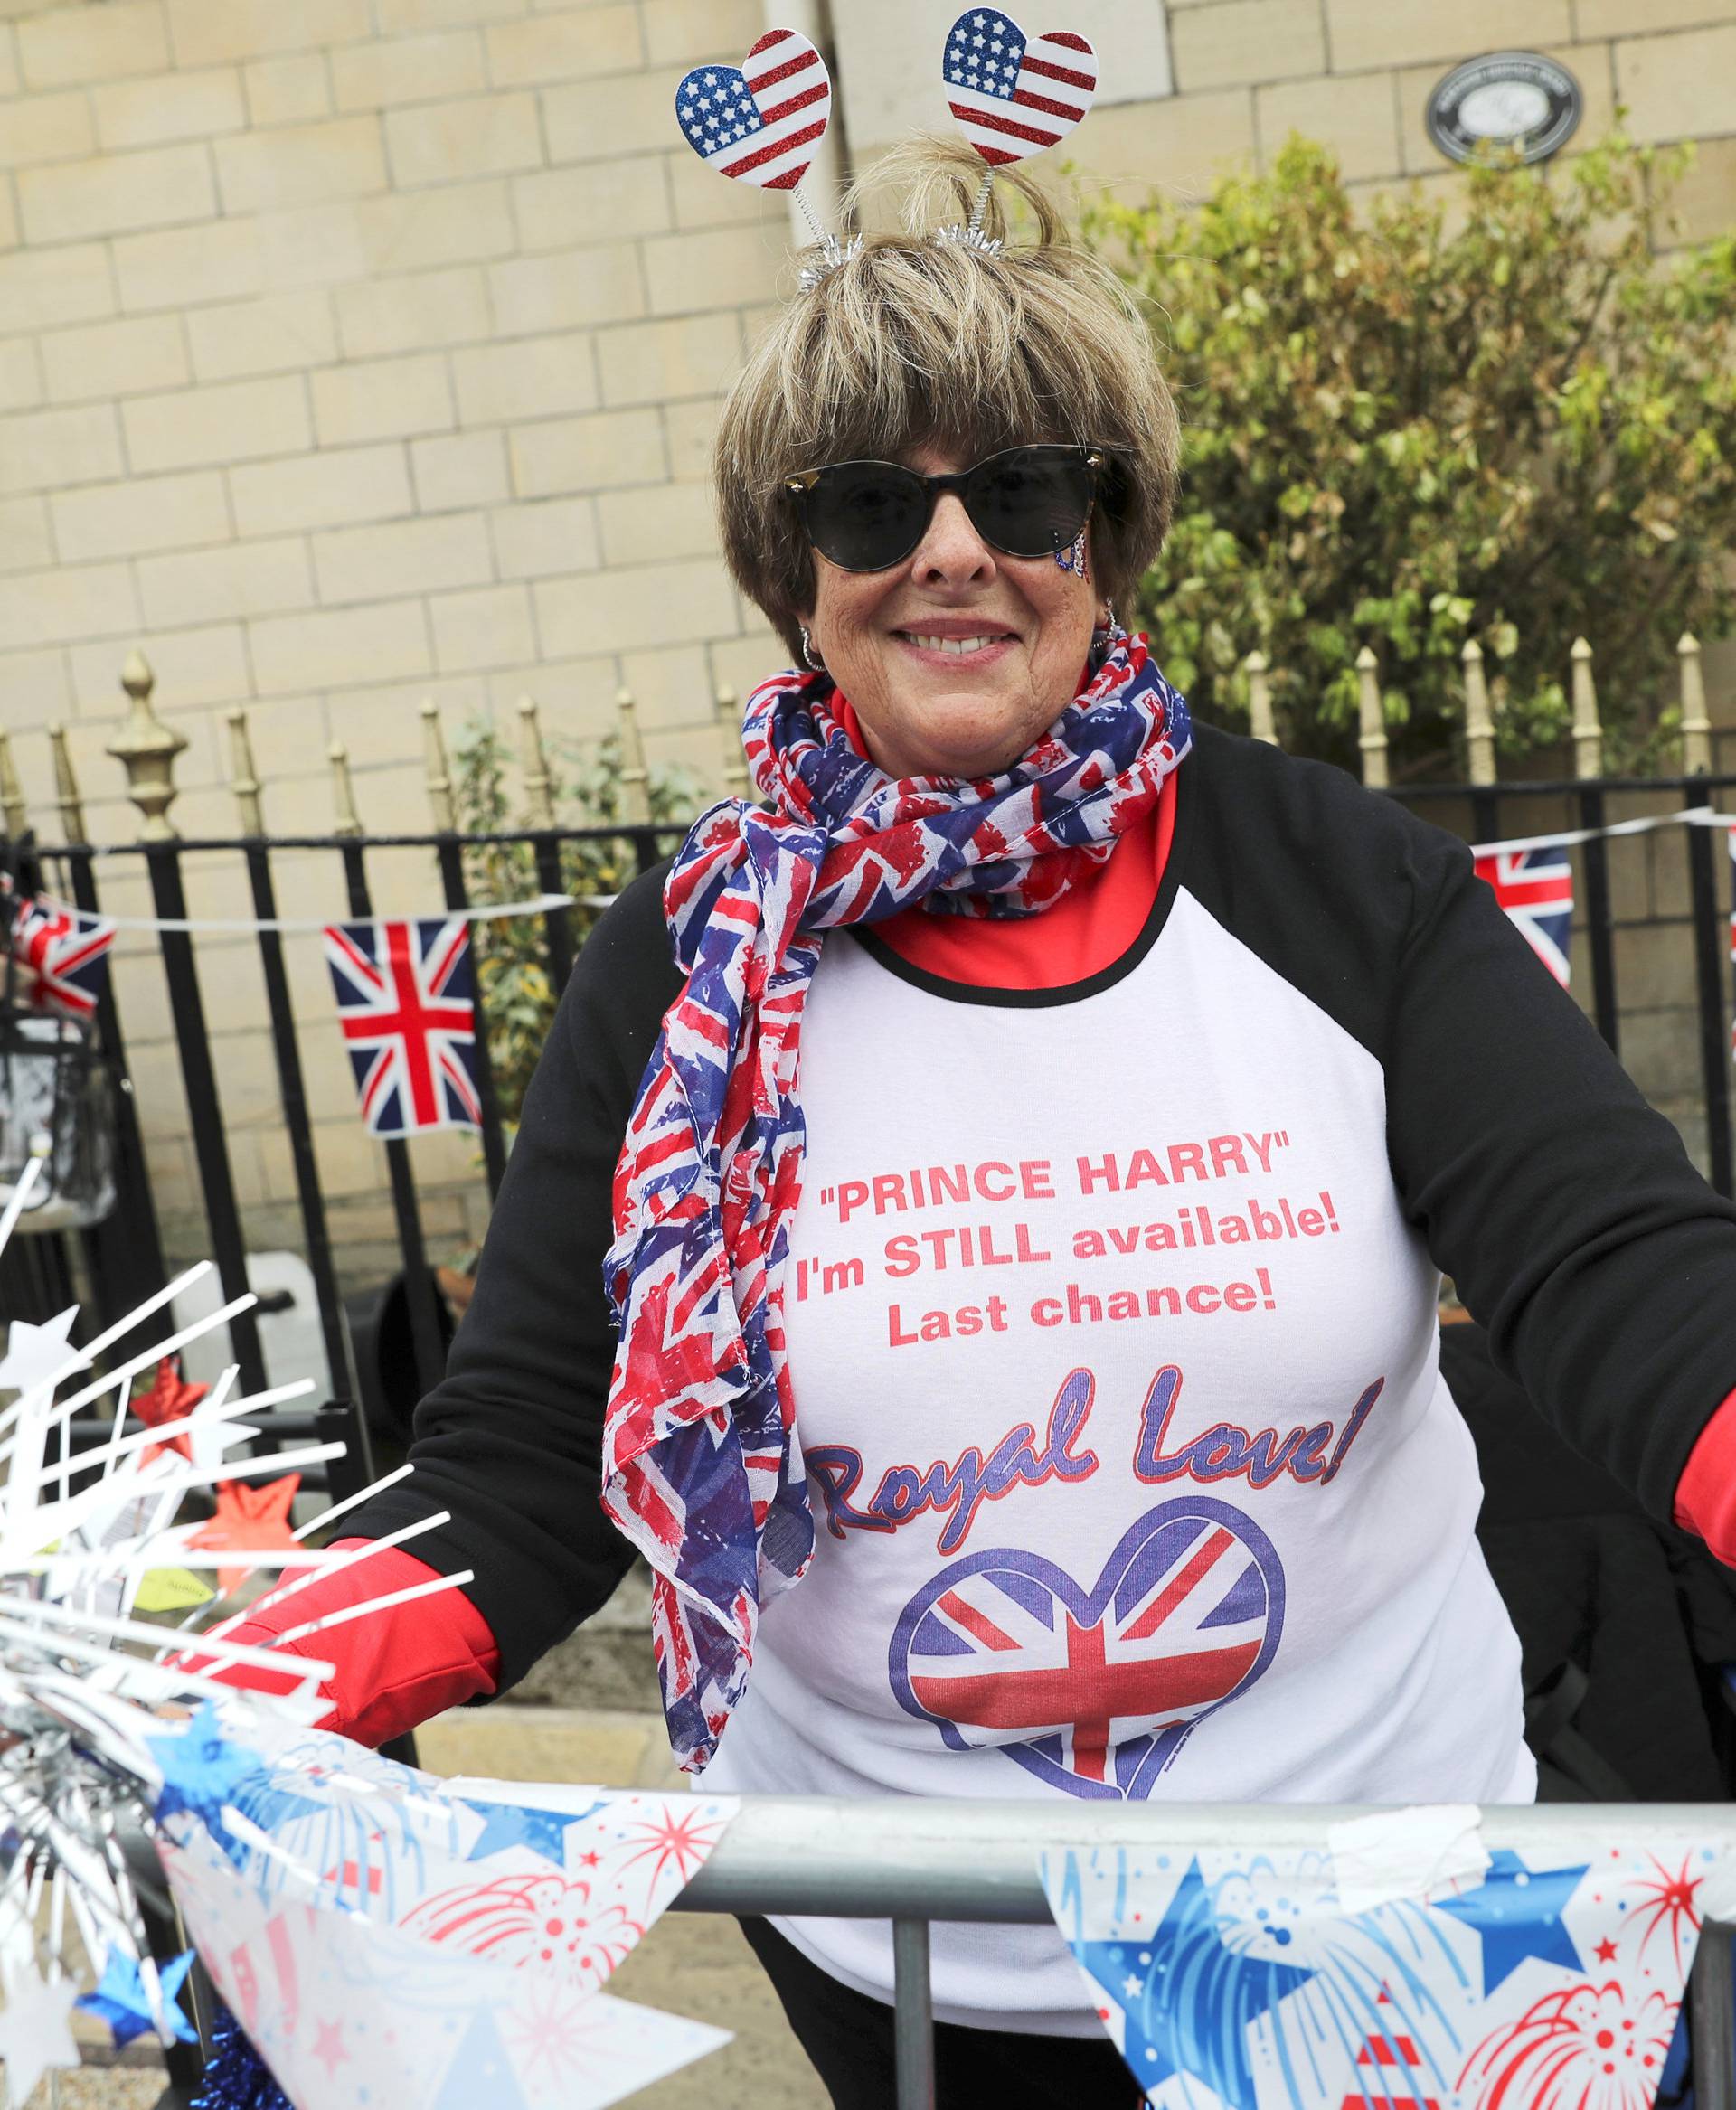 Donna Werner from the U.S., who is a super-fan of Britain's Royal Family, arranges flags and decorations near the spot she has chosen outside Windsor Castle from which to witness Prince Harry and Meghan Markle's carriage procession after their wedding, in